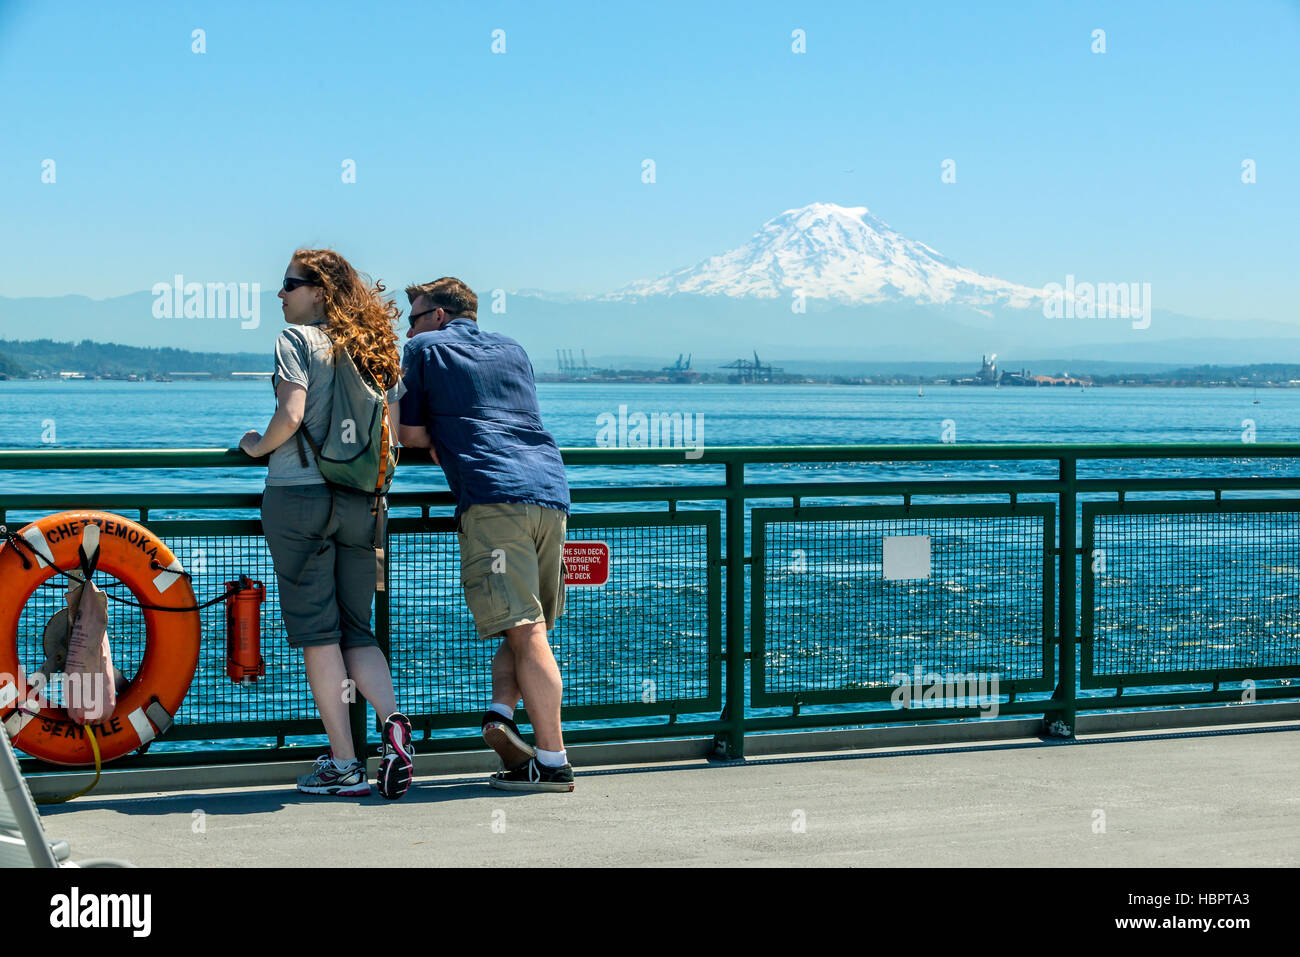 Taking the ferry from Seattle - Fauntleroy to Vashon Island across the Puget Sound. Stock Photo